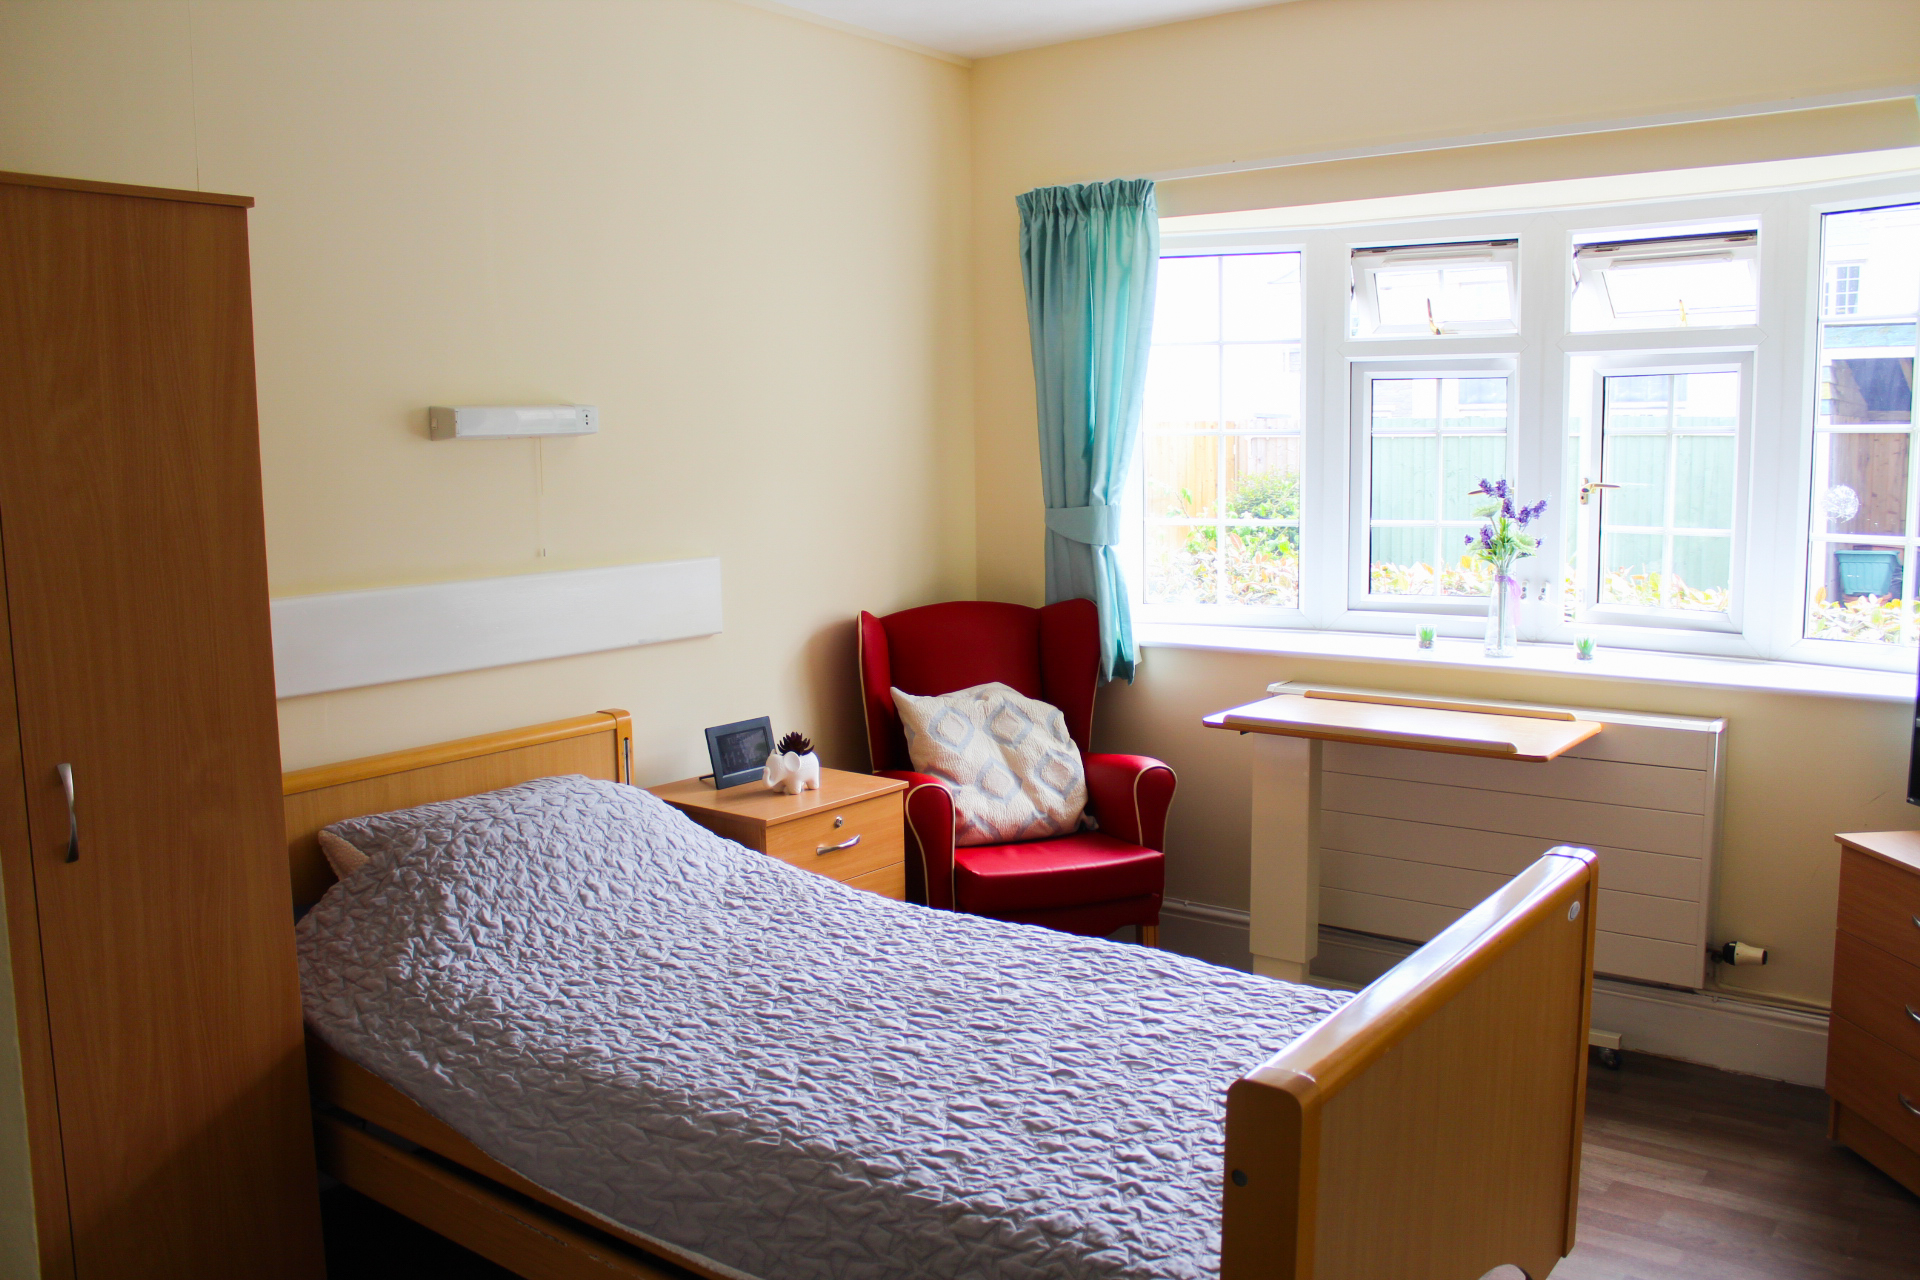 Bedroom at Picton Court Care Home